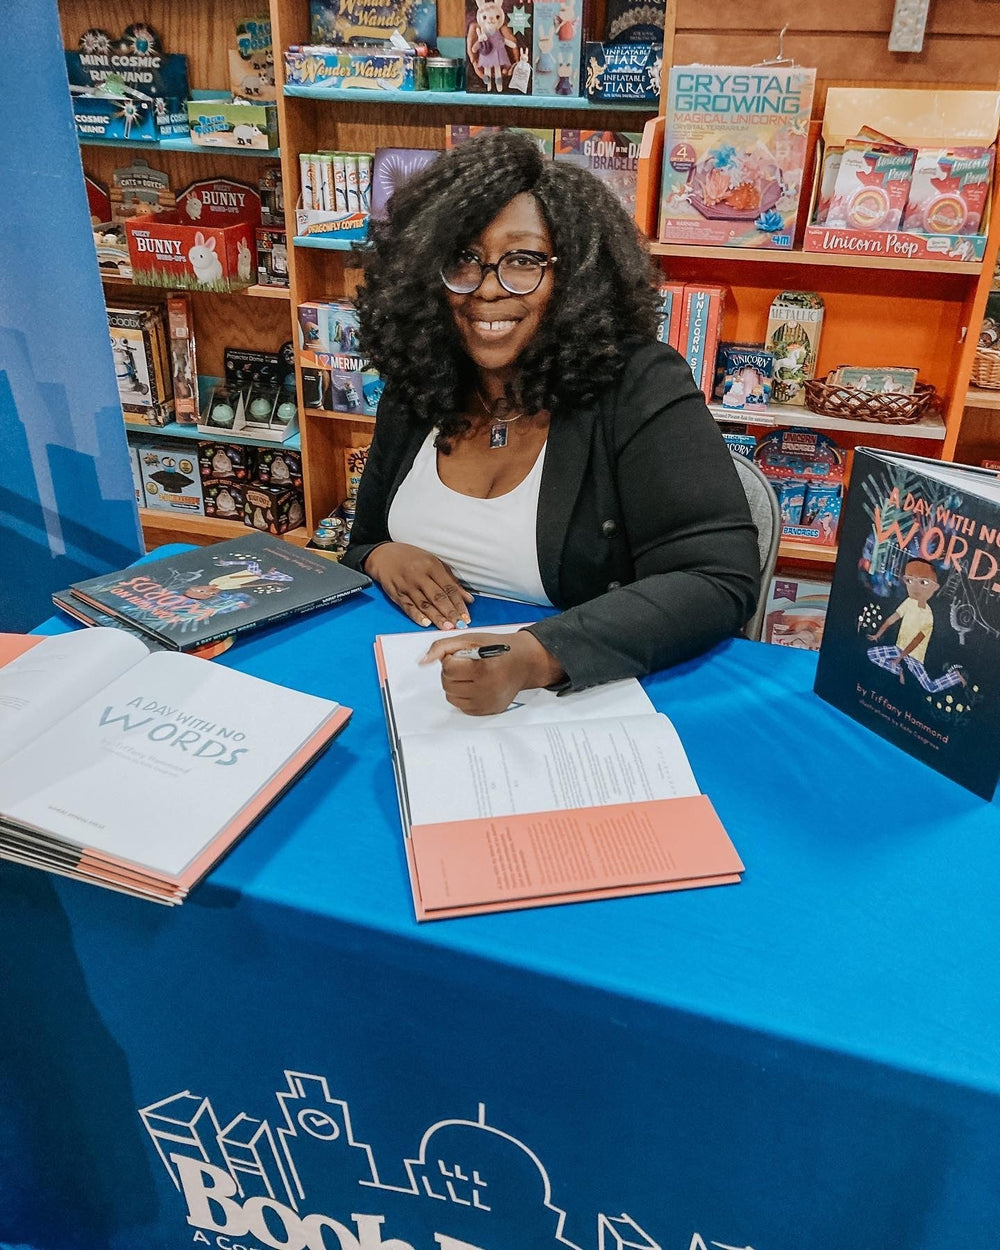 A dark skinned woman with glasses and curly, shoulder length hair sits at a table during a book signing event with a book open and a pen perched above a page.